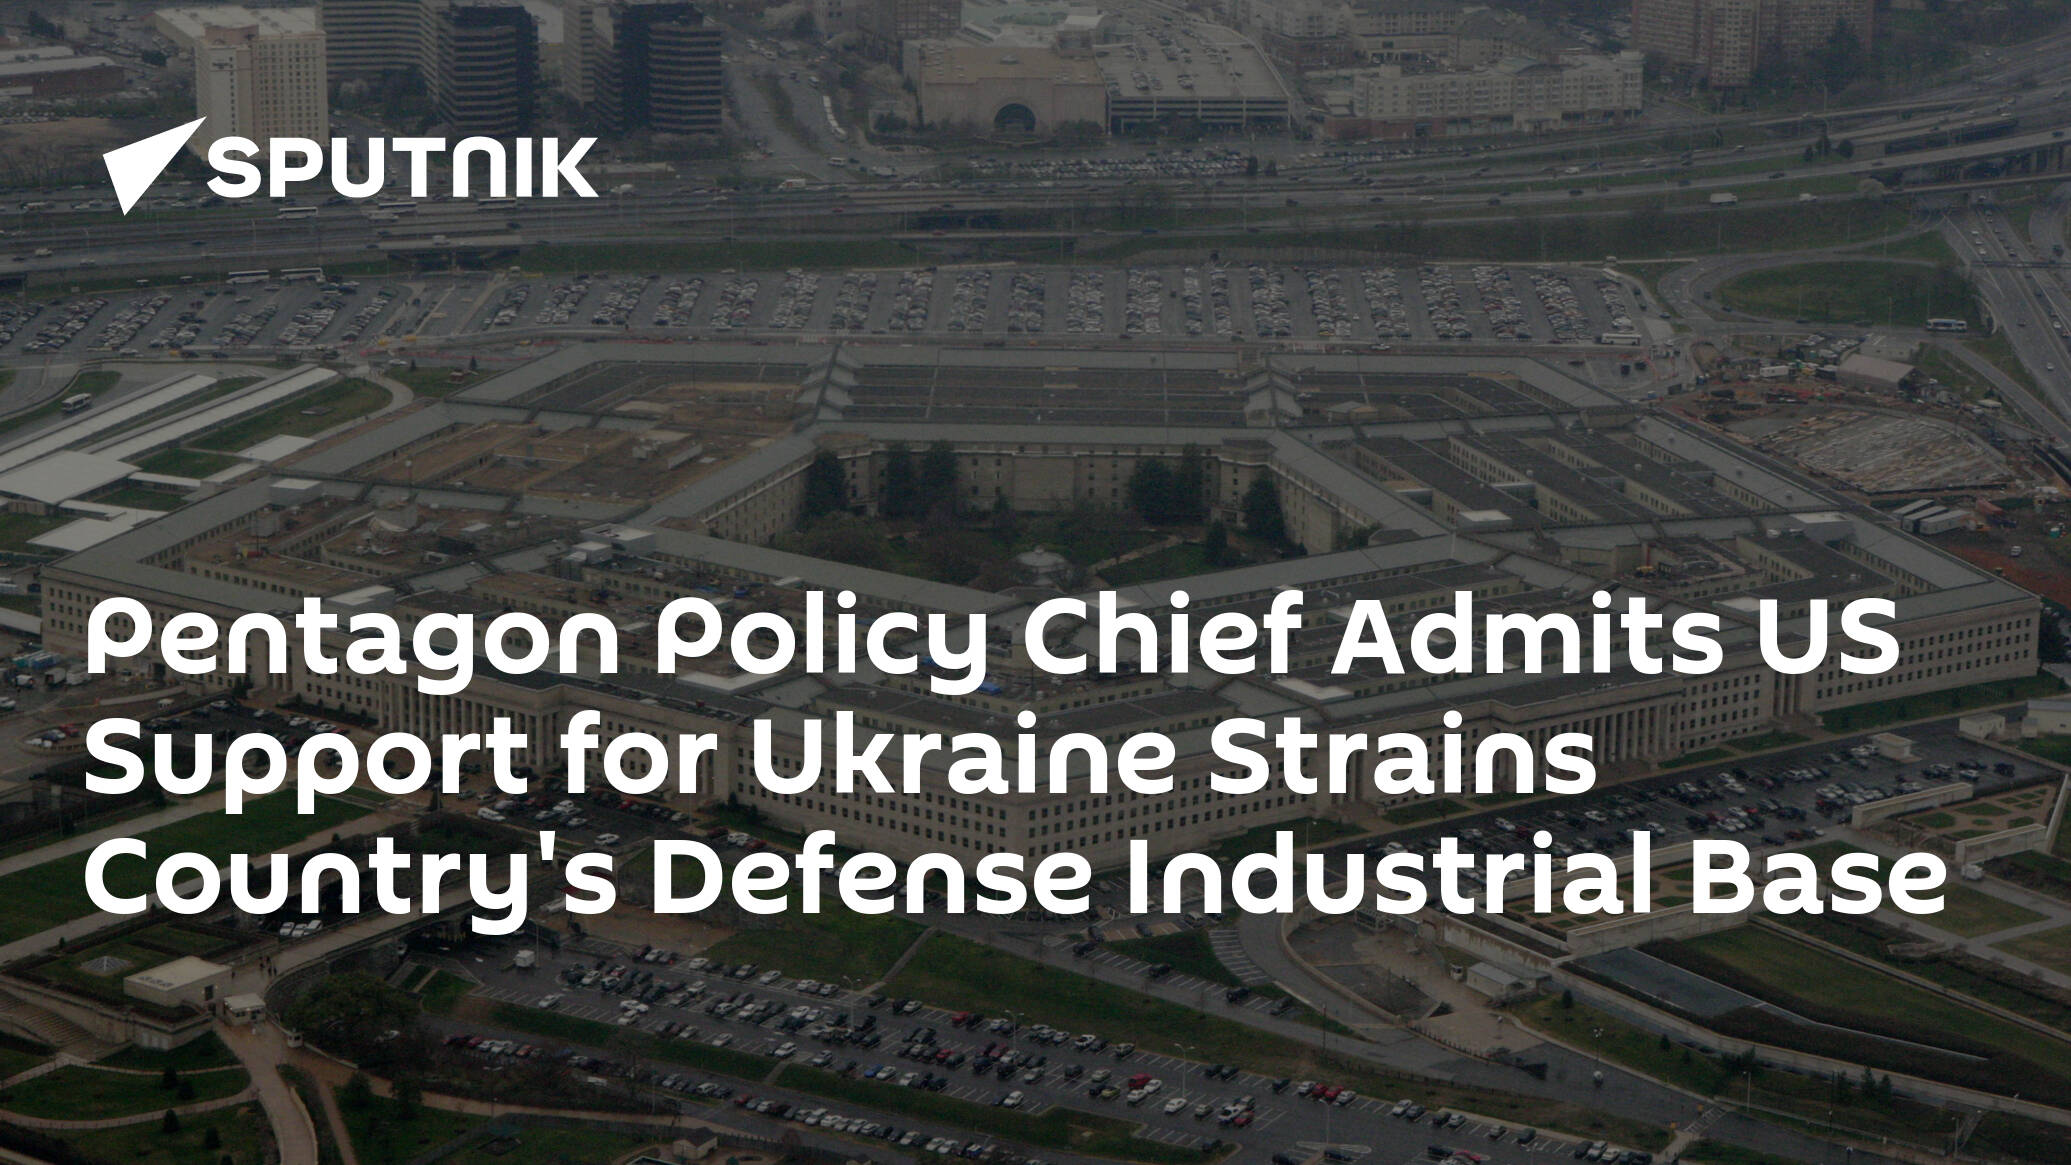 Pentagon Policy Chief Admits US Support for Ukraine Strains Country's Defense Industrial Base